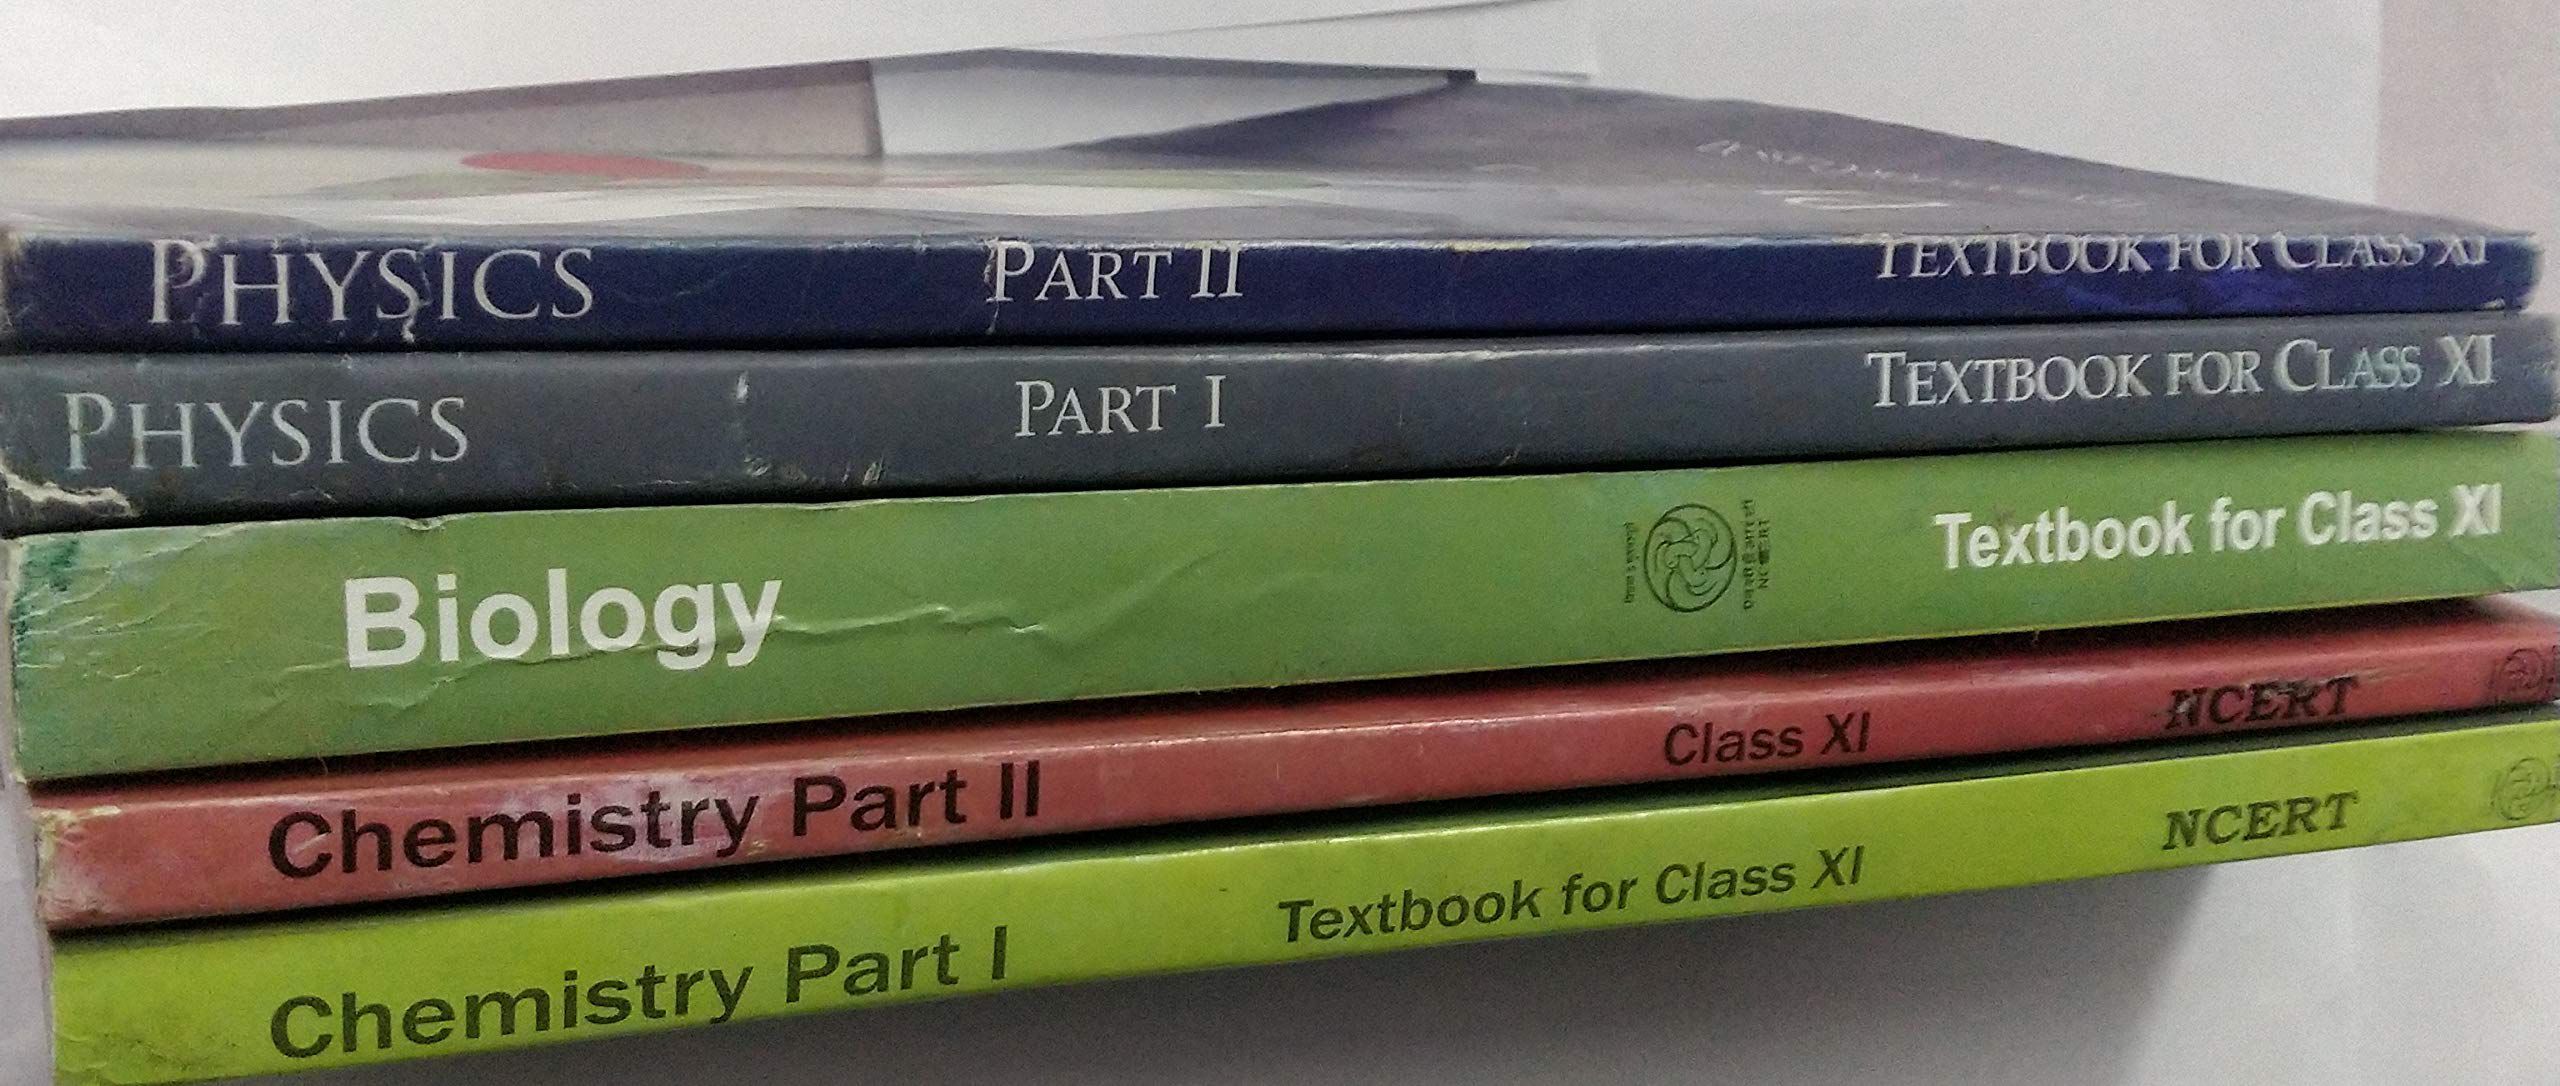 NCERT SCIENCE (PCB) Complete Books Set For CLASS 11 (ENGLISH MEDIUM